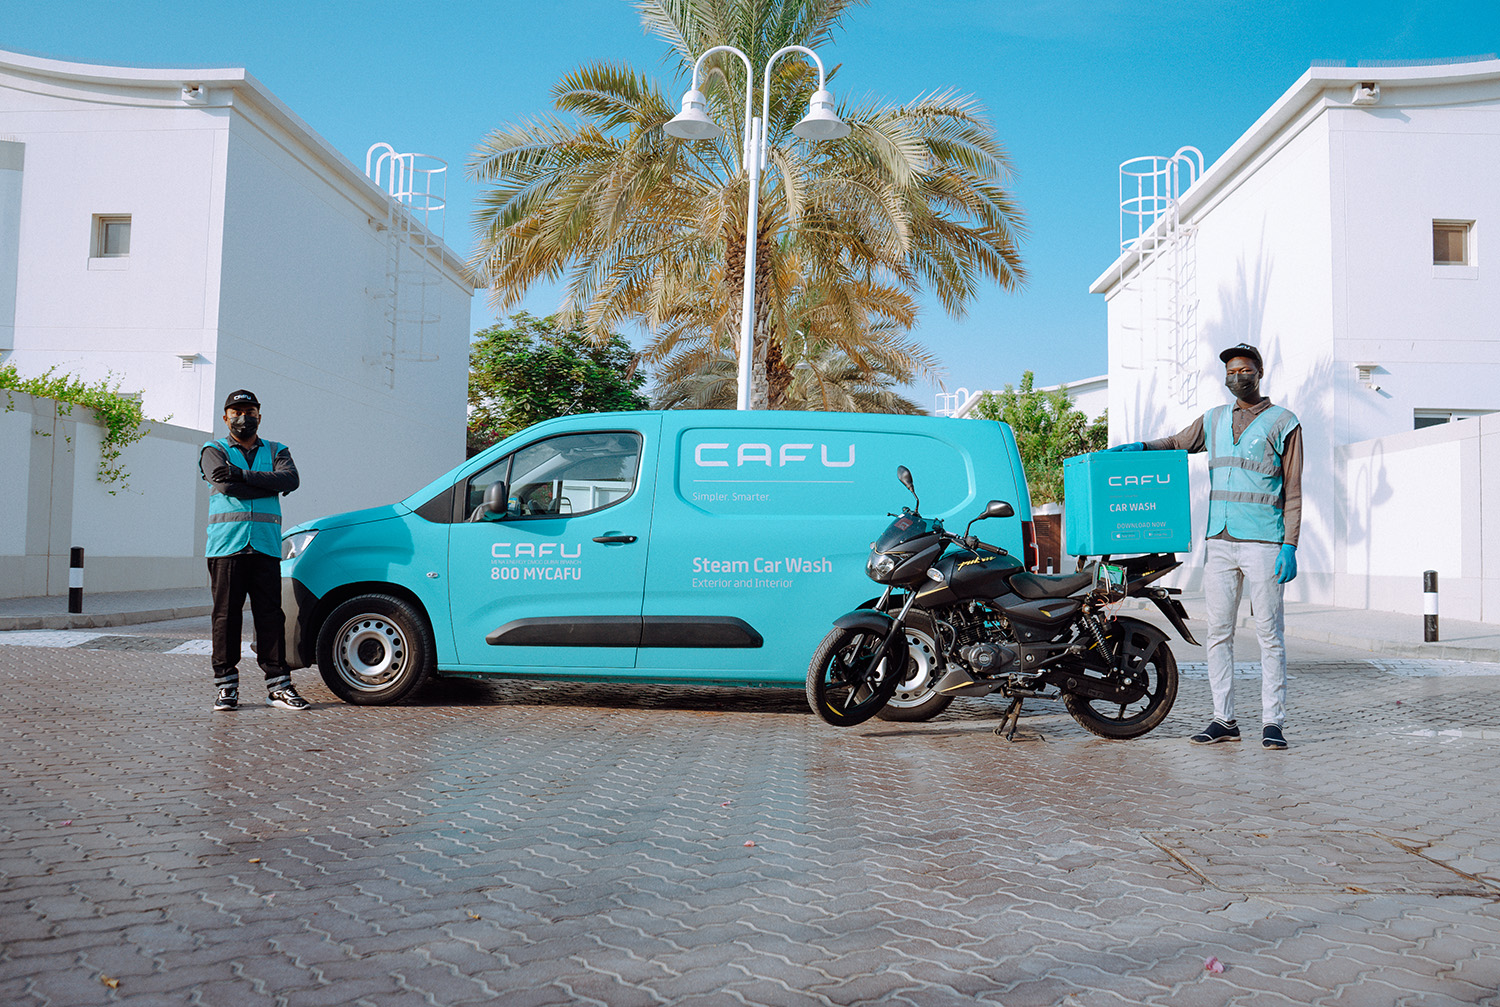 CAFU Expands Its Operations To Abu Dhabi After Witnessing Major Uptake For On-Demand Car Services